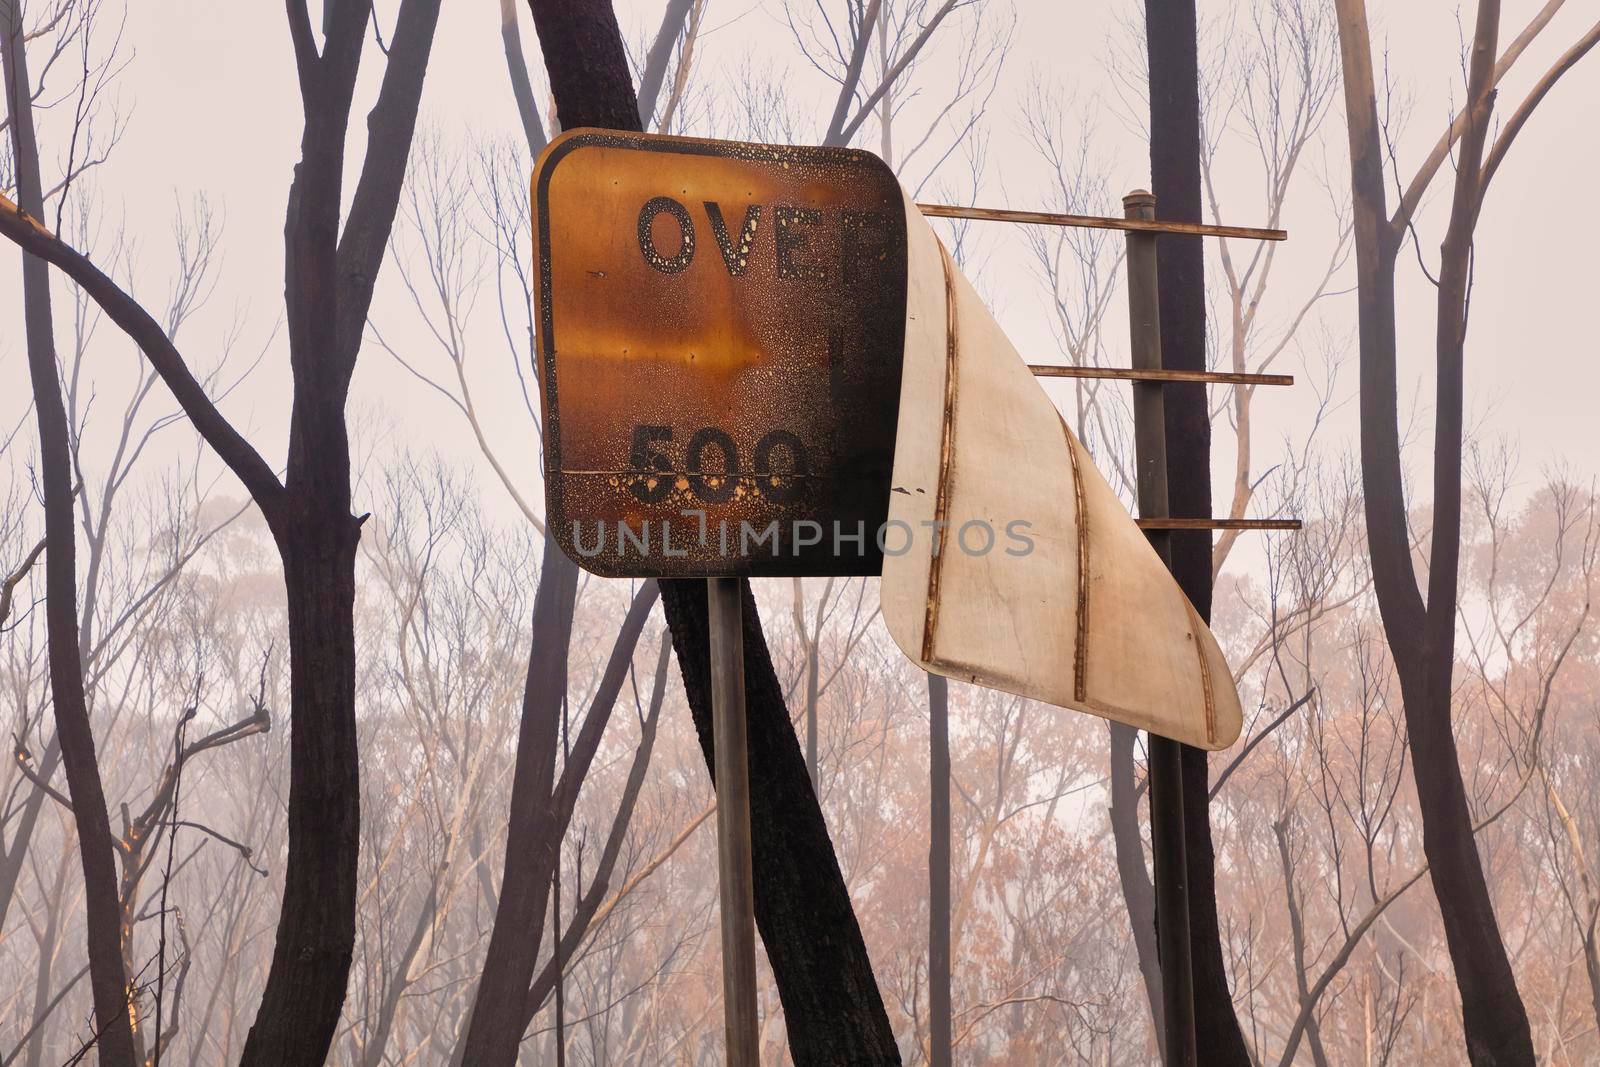 A street sign burnt by bushfire in The Blue Mountains in Australia